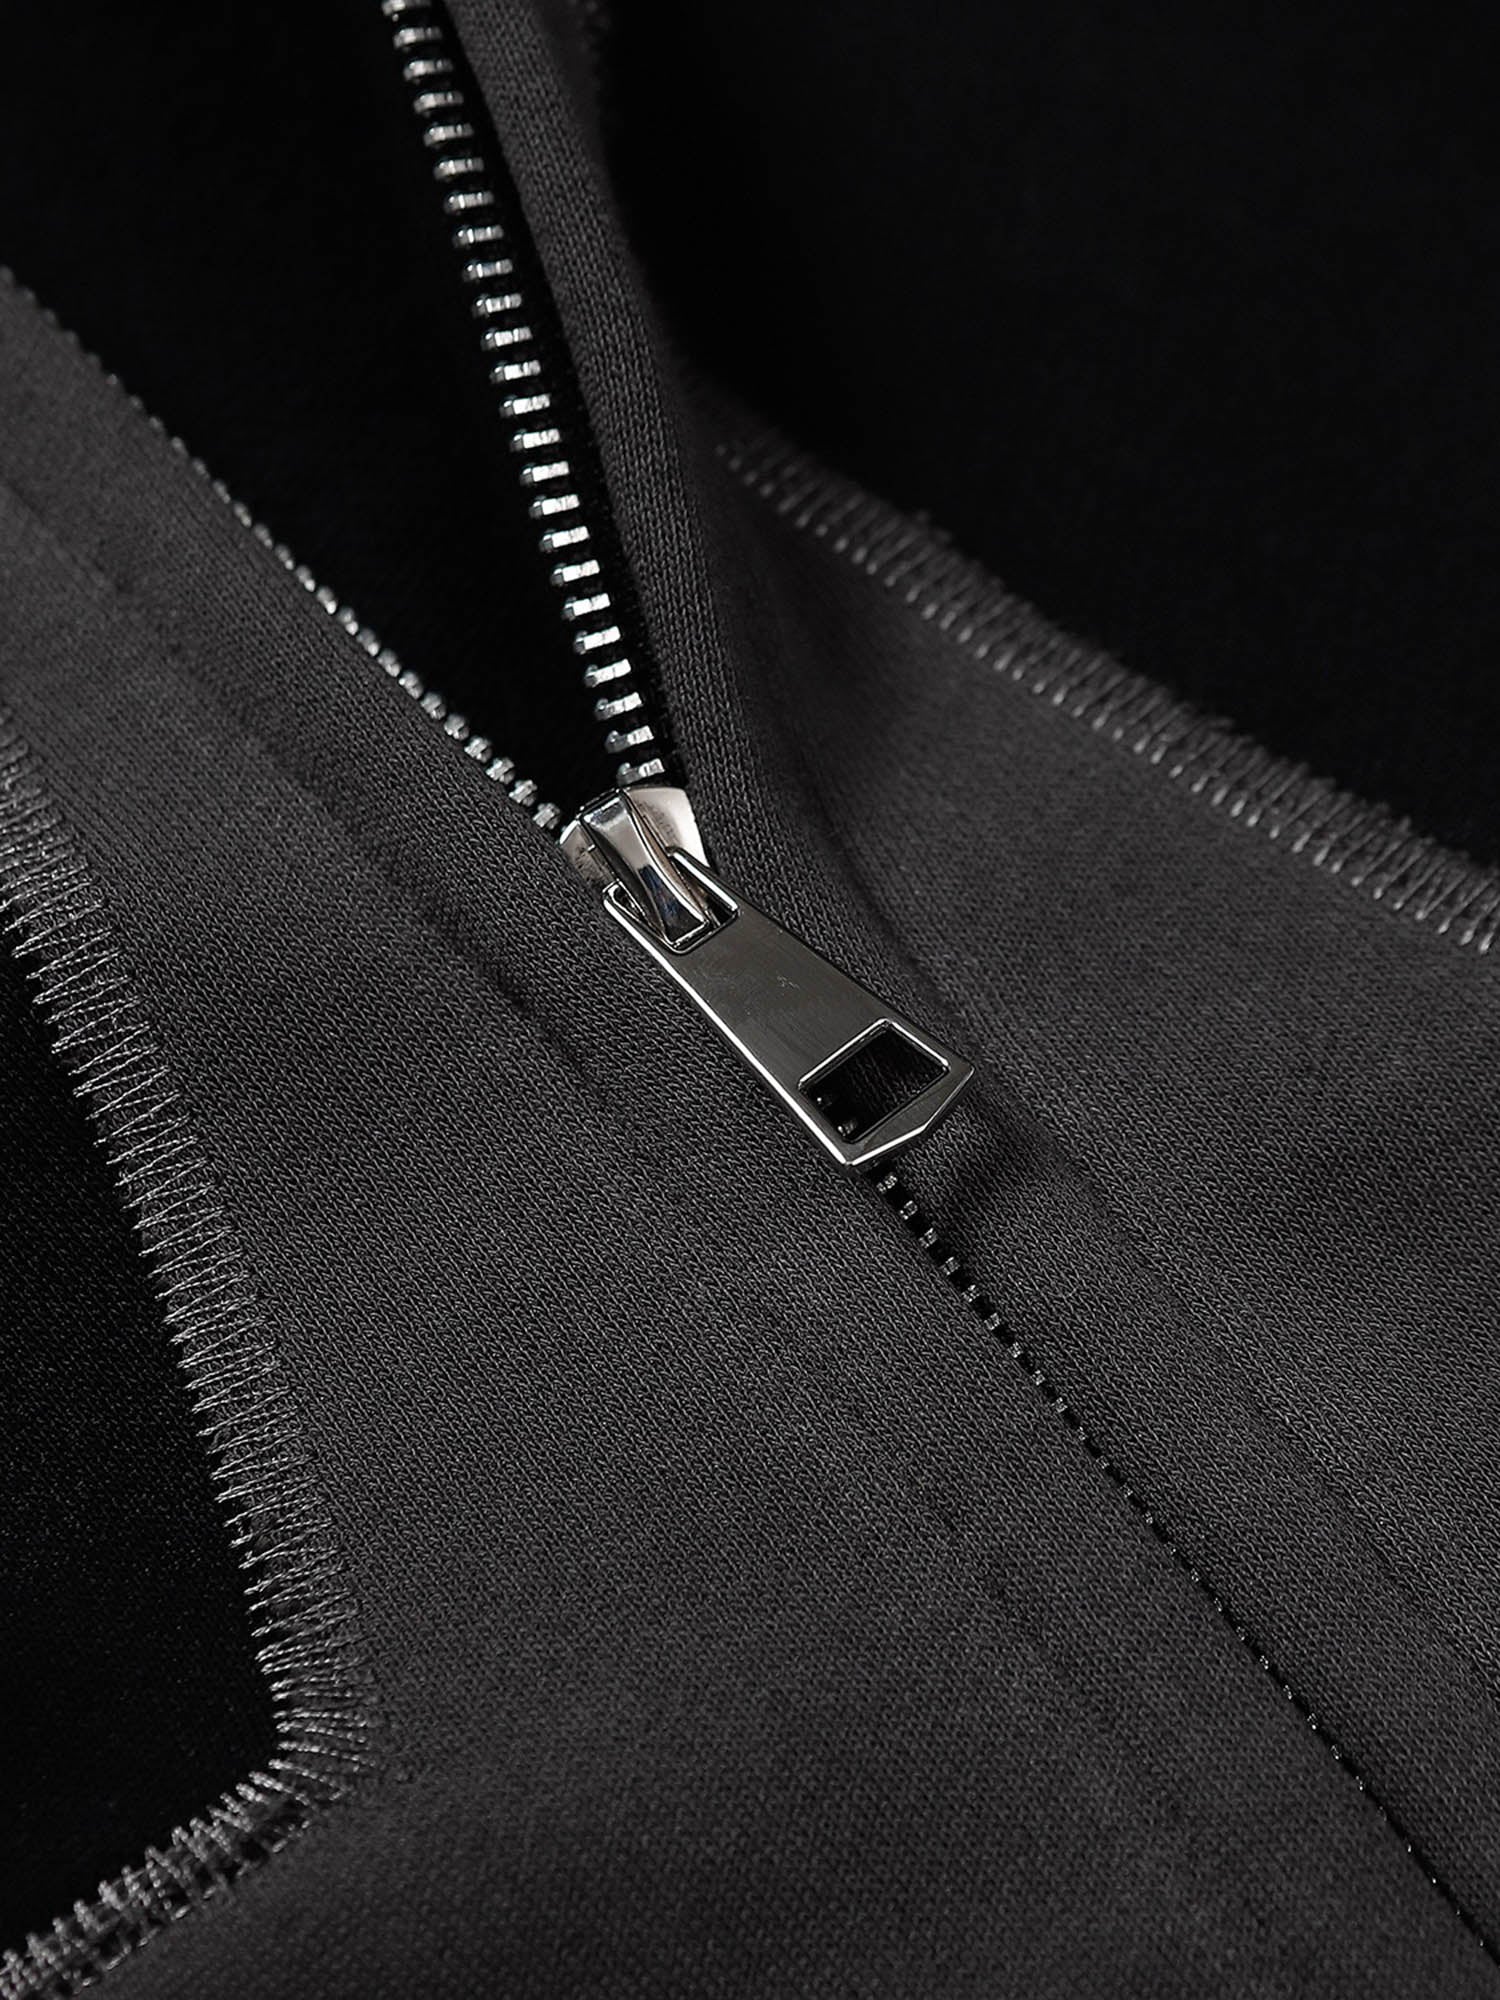 Thesupermade Five-pointed Zipper Hoodie